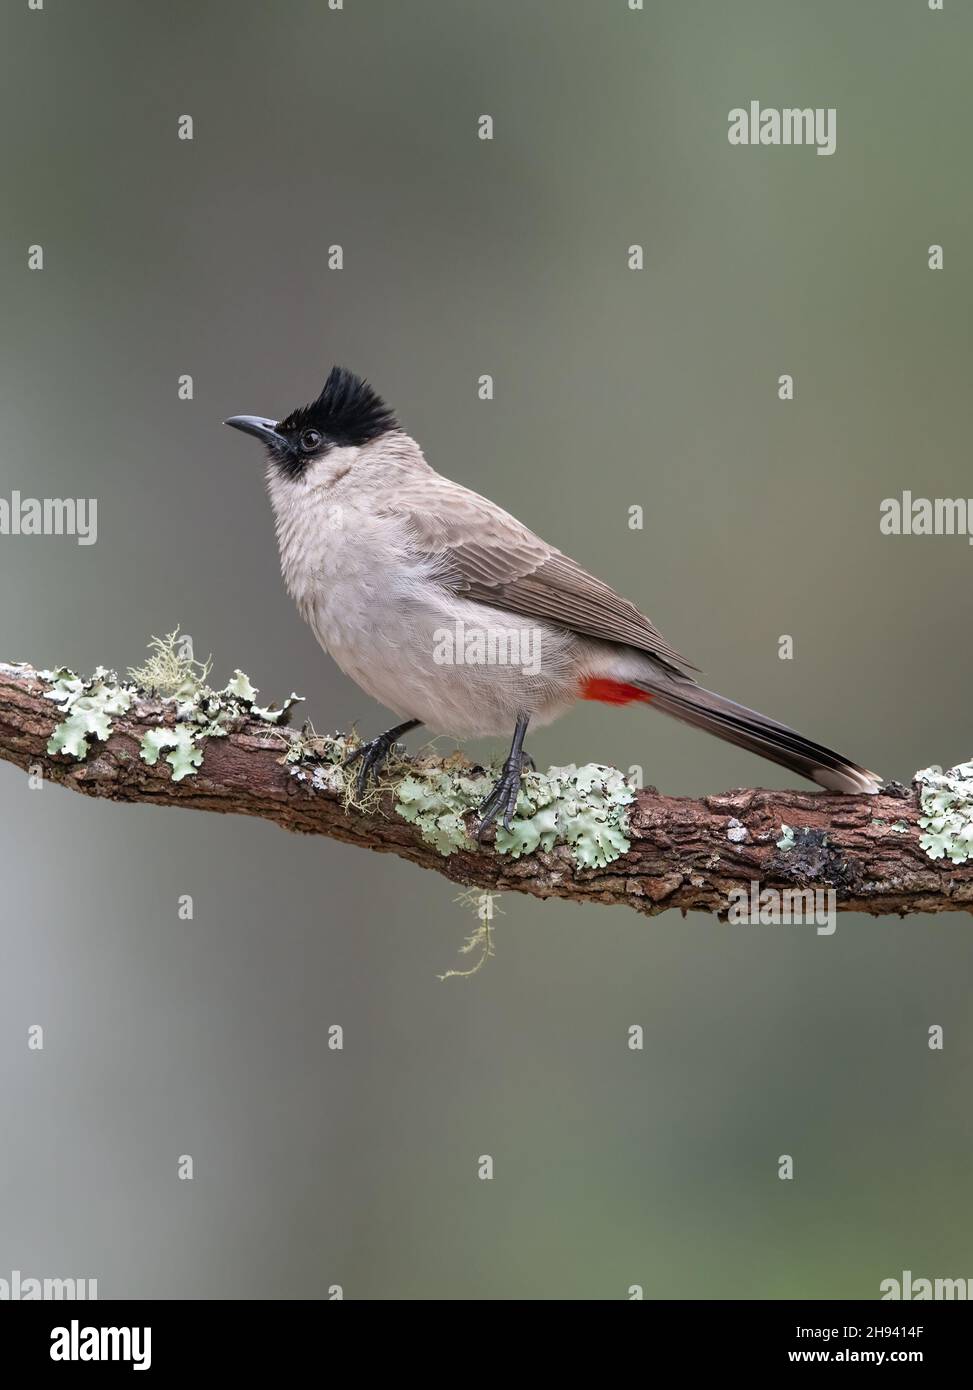 The sooty-headed bulbul (Pycnonotus aurigaster) is a species of songbird in the Bulbul family, Pycnonotidae. It is found in south-eastern Asia. Its na Stock Photo